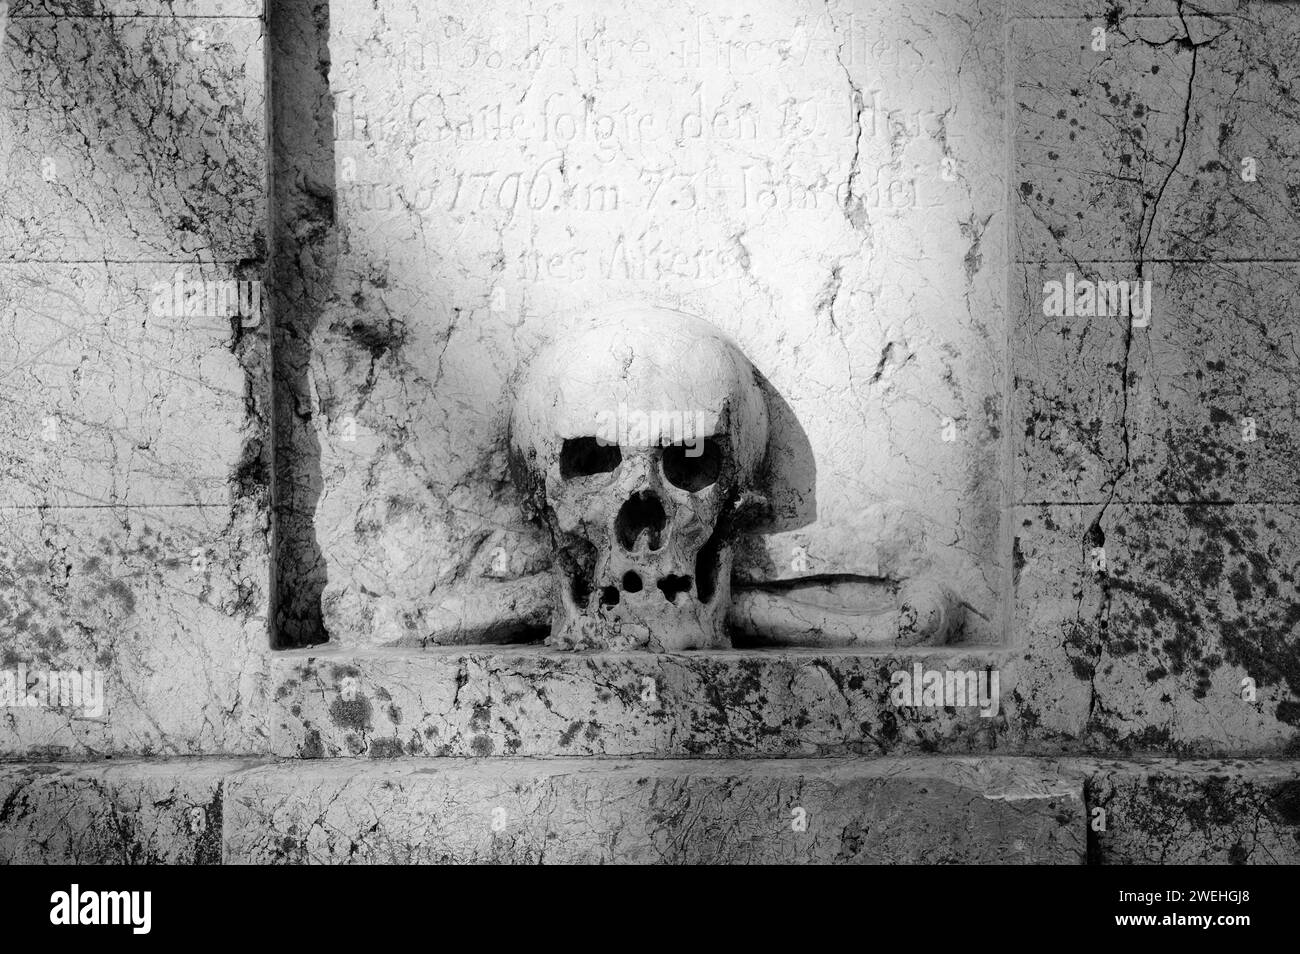 Skull on a gravestone, the inscription dates from 1796, old south cemetery, Munich, Bavaria, Germany Stock Photo